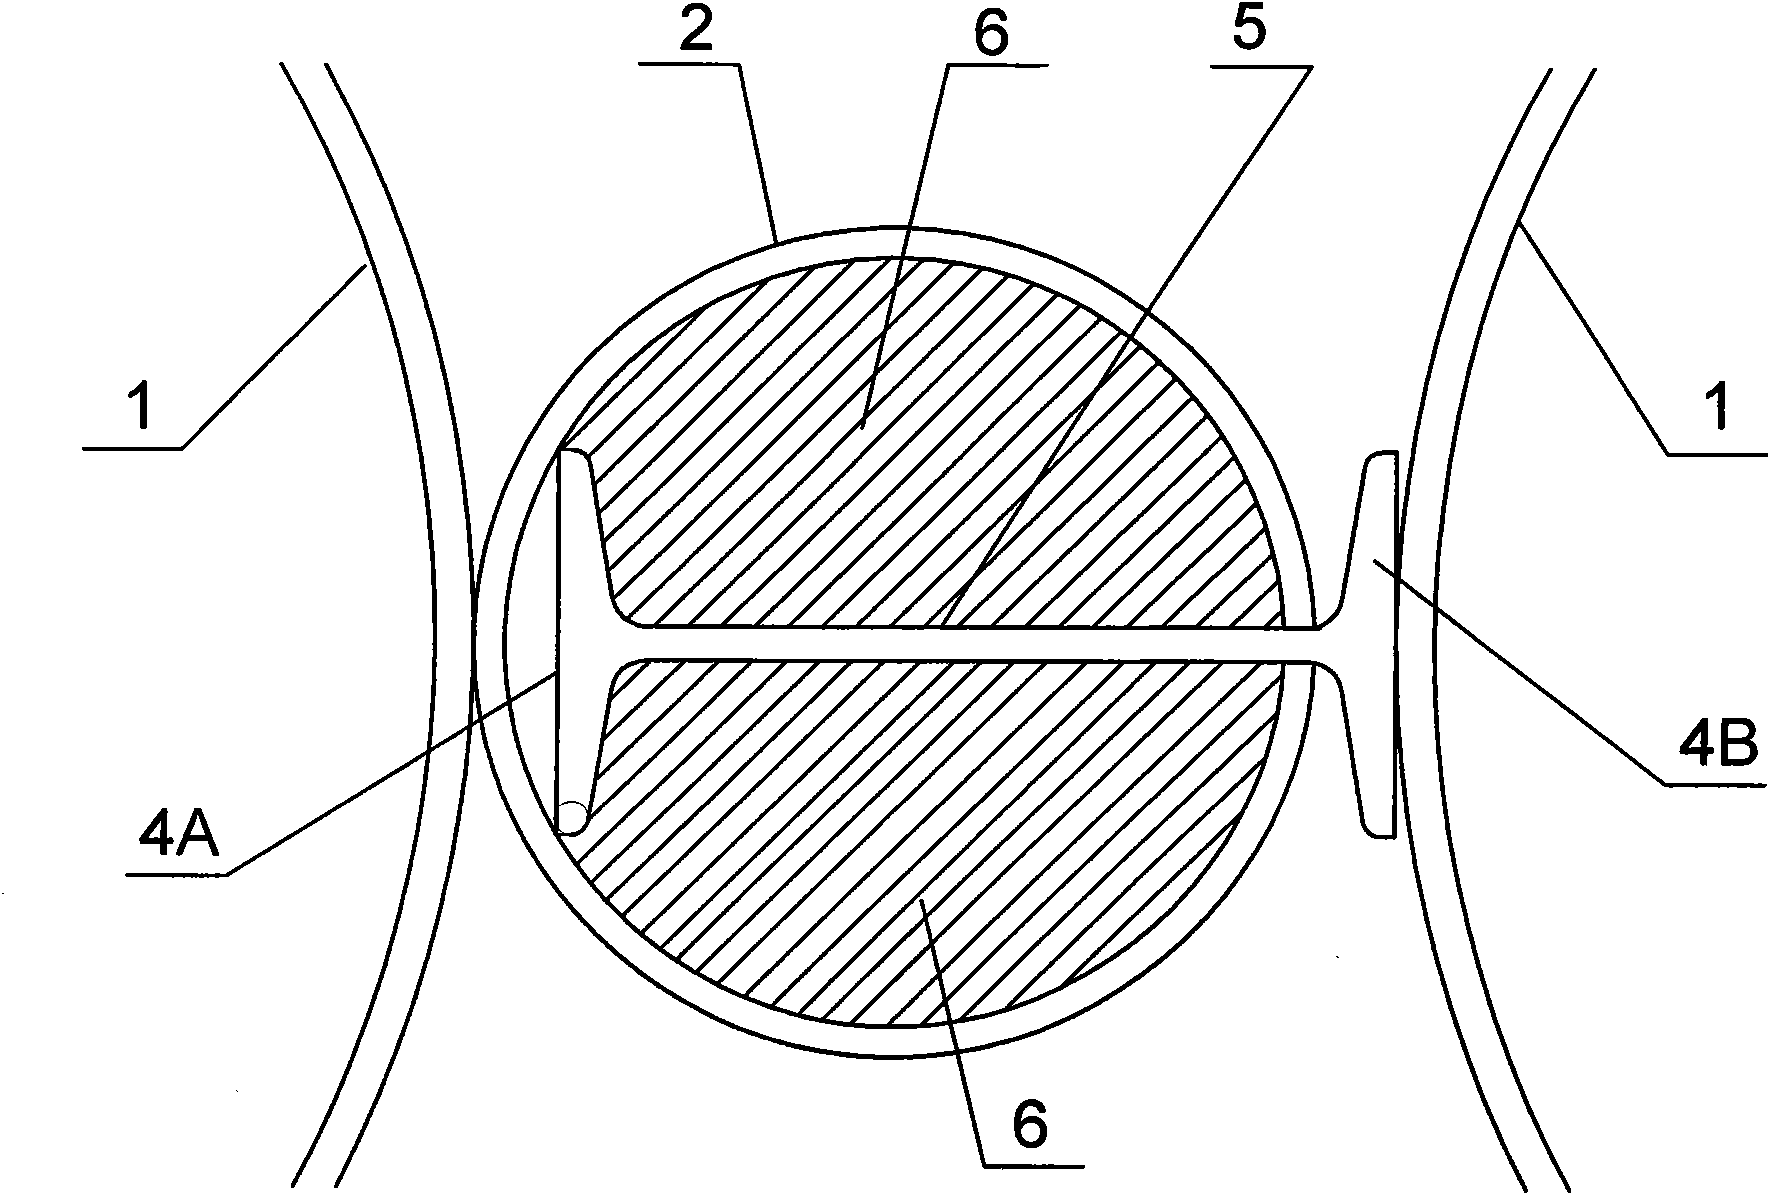 Steel pipe pile locking notch structure and water-stopping method of steel pipe pile cofferdam